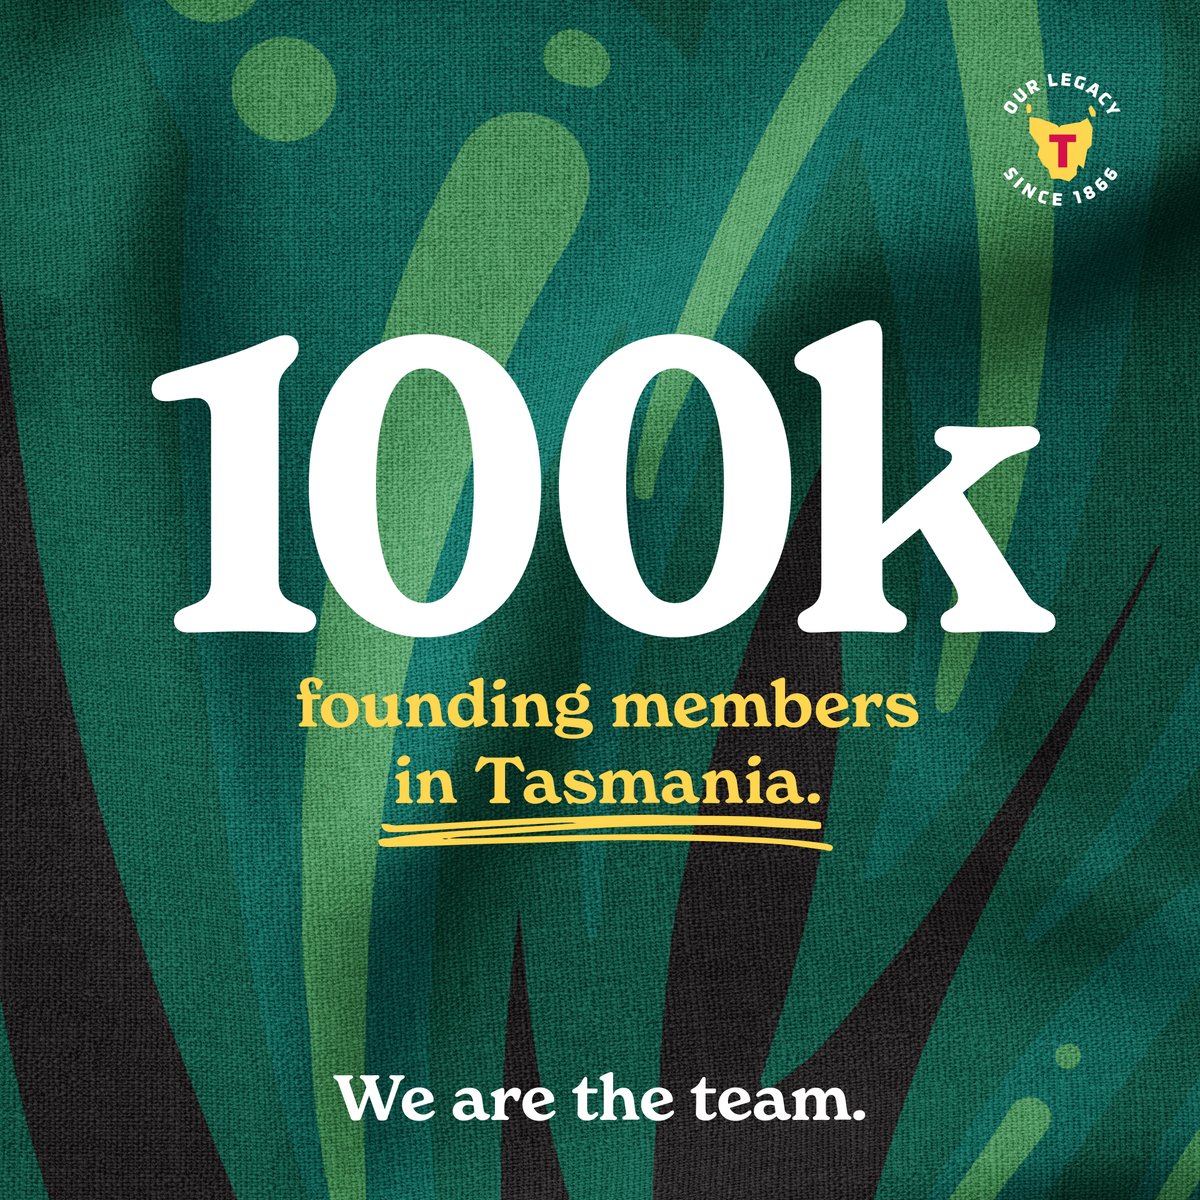 We have reached 100,000 Founding Members in Tasmania! And guess how many overall? (Hint, it's not 200k, but close.) Find out how many, as well as read other important updates from our Chair Grant O'Brien, here --> tasmaniafc.com/news/board-upd…